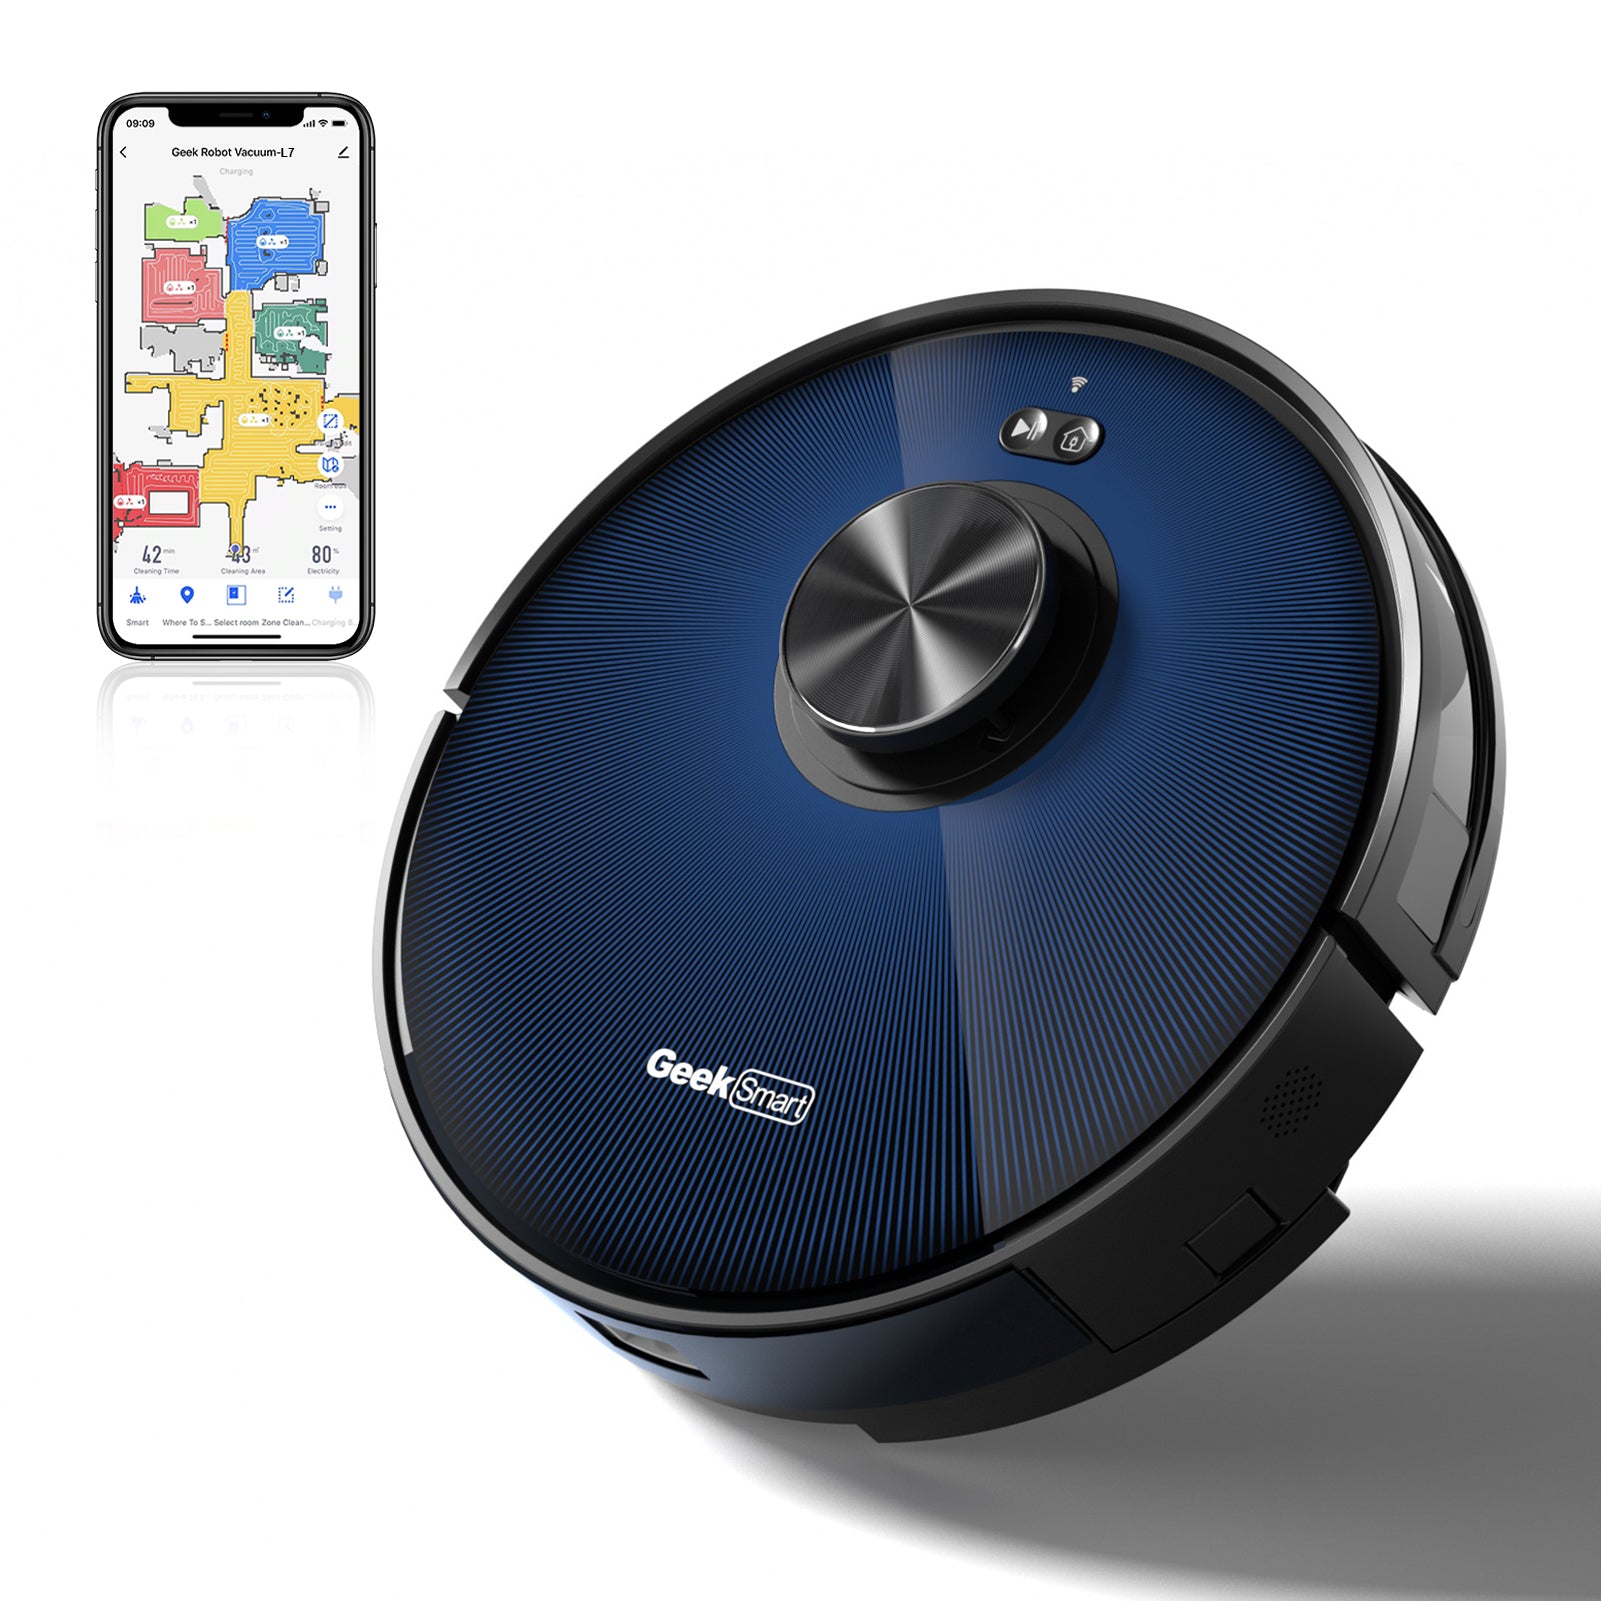 geek-smart-l7-robot-vacuum-cleaner-and-mop-lds-navigation-wi-fi-connected-app-selective-room-cleaning-max-2700-pa-suction-ideal-for-pets-and-larger-home-banned-from-selling-on-amazon